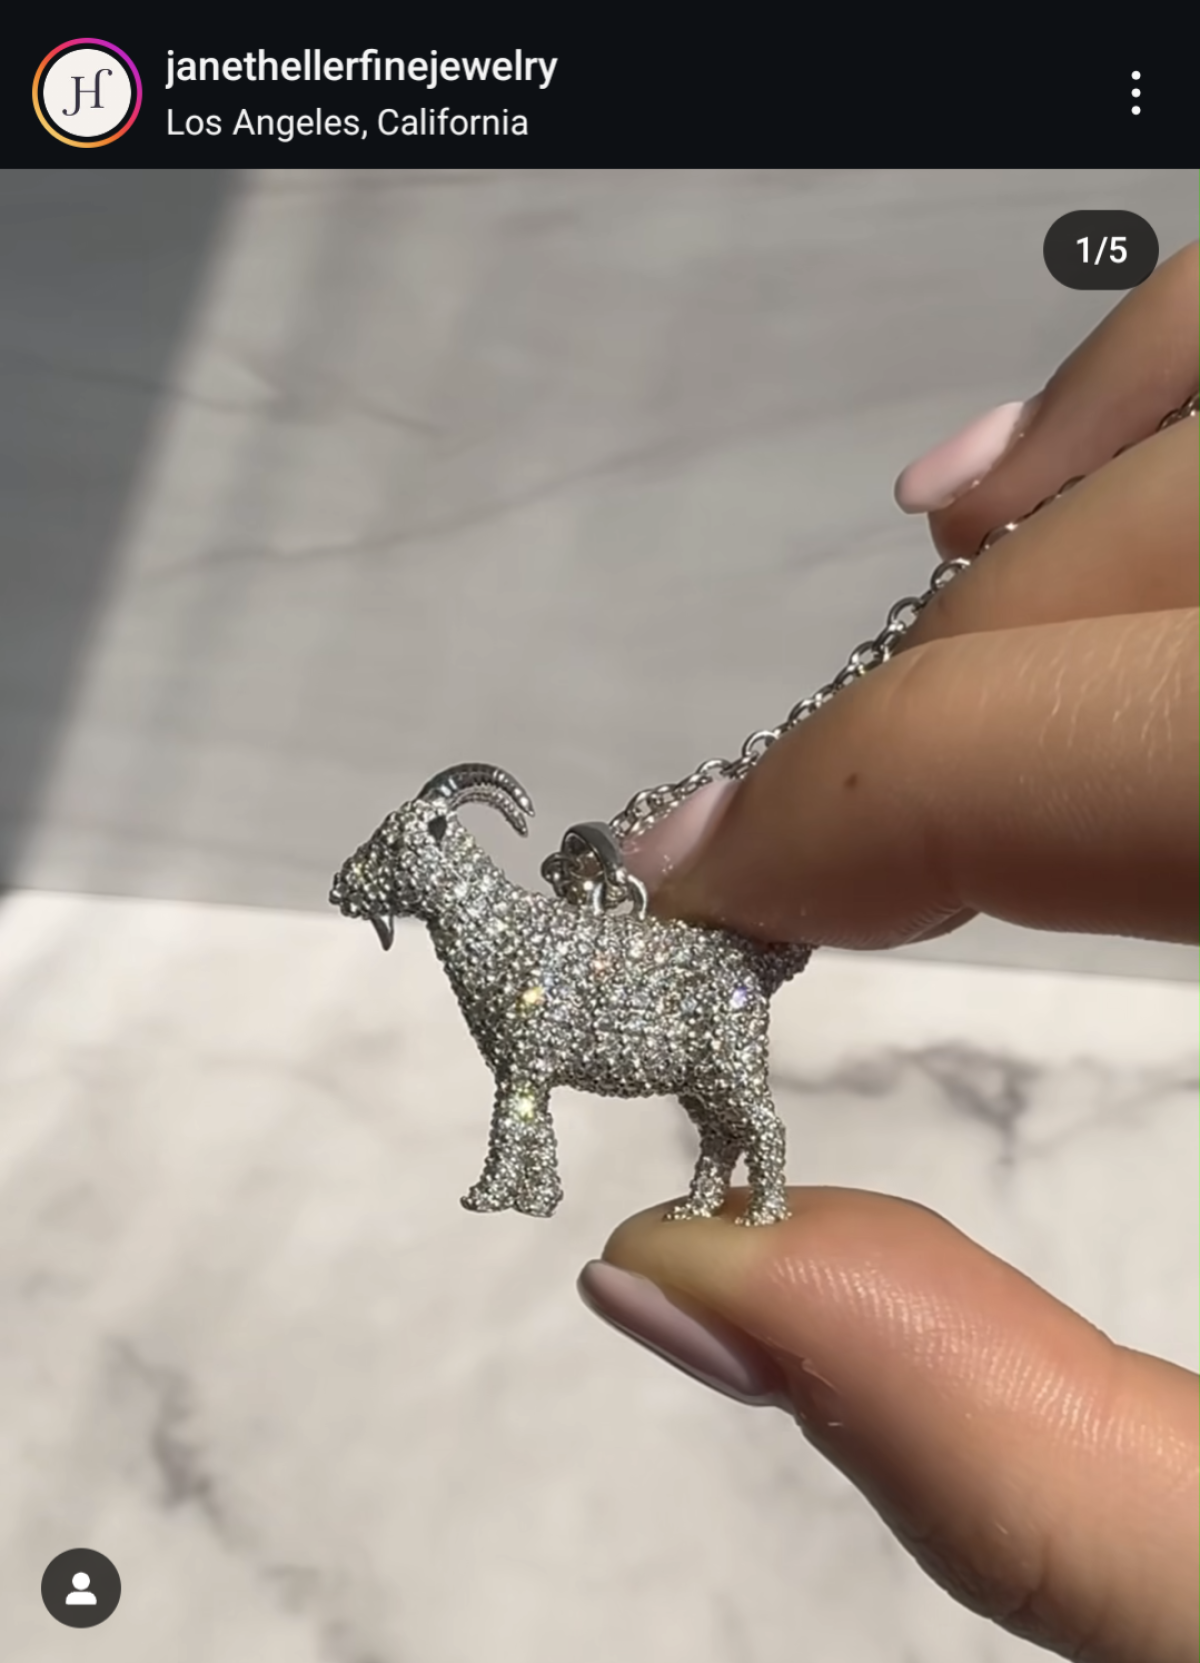 A photo shows the diamond-encrusted goat pendant created for Olympic star Simone Biles by Jane Heller Fine Jewelry